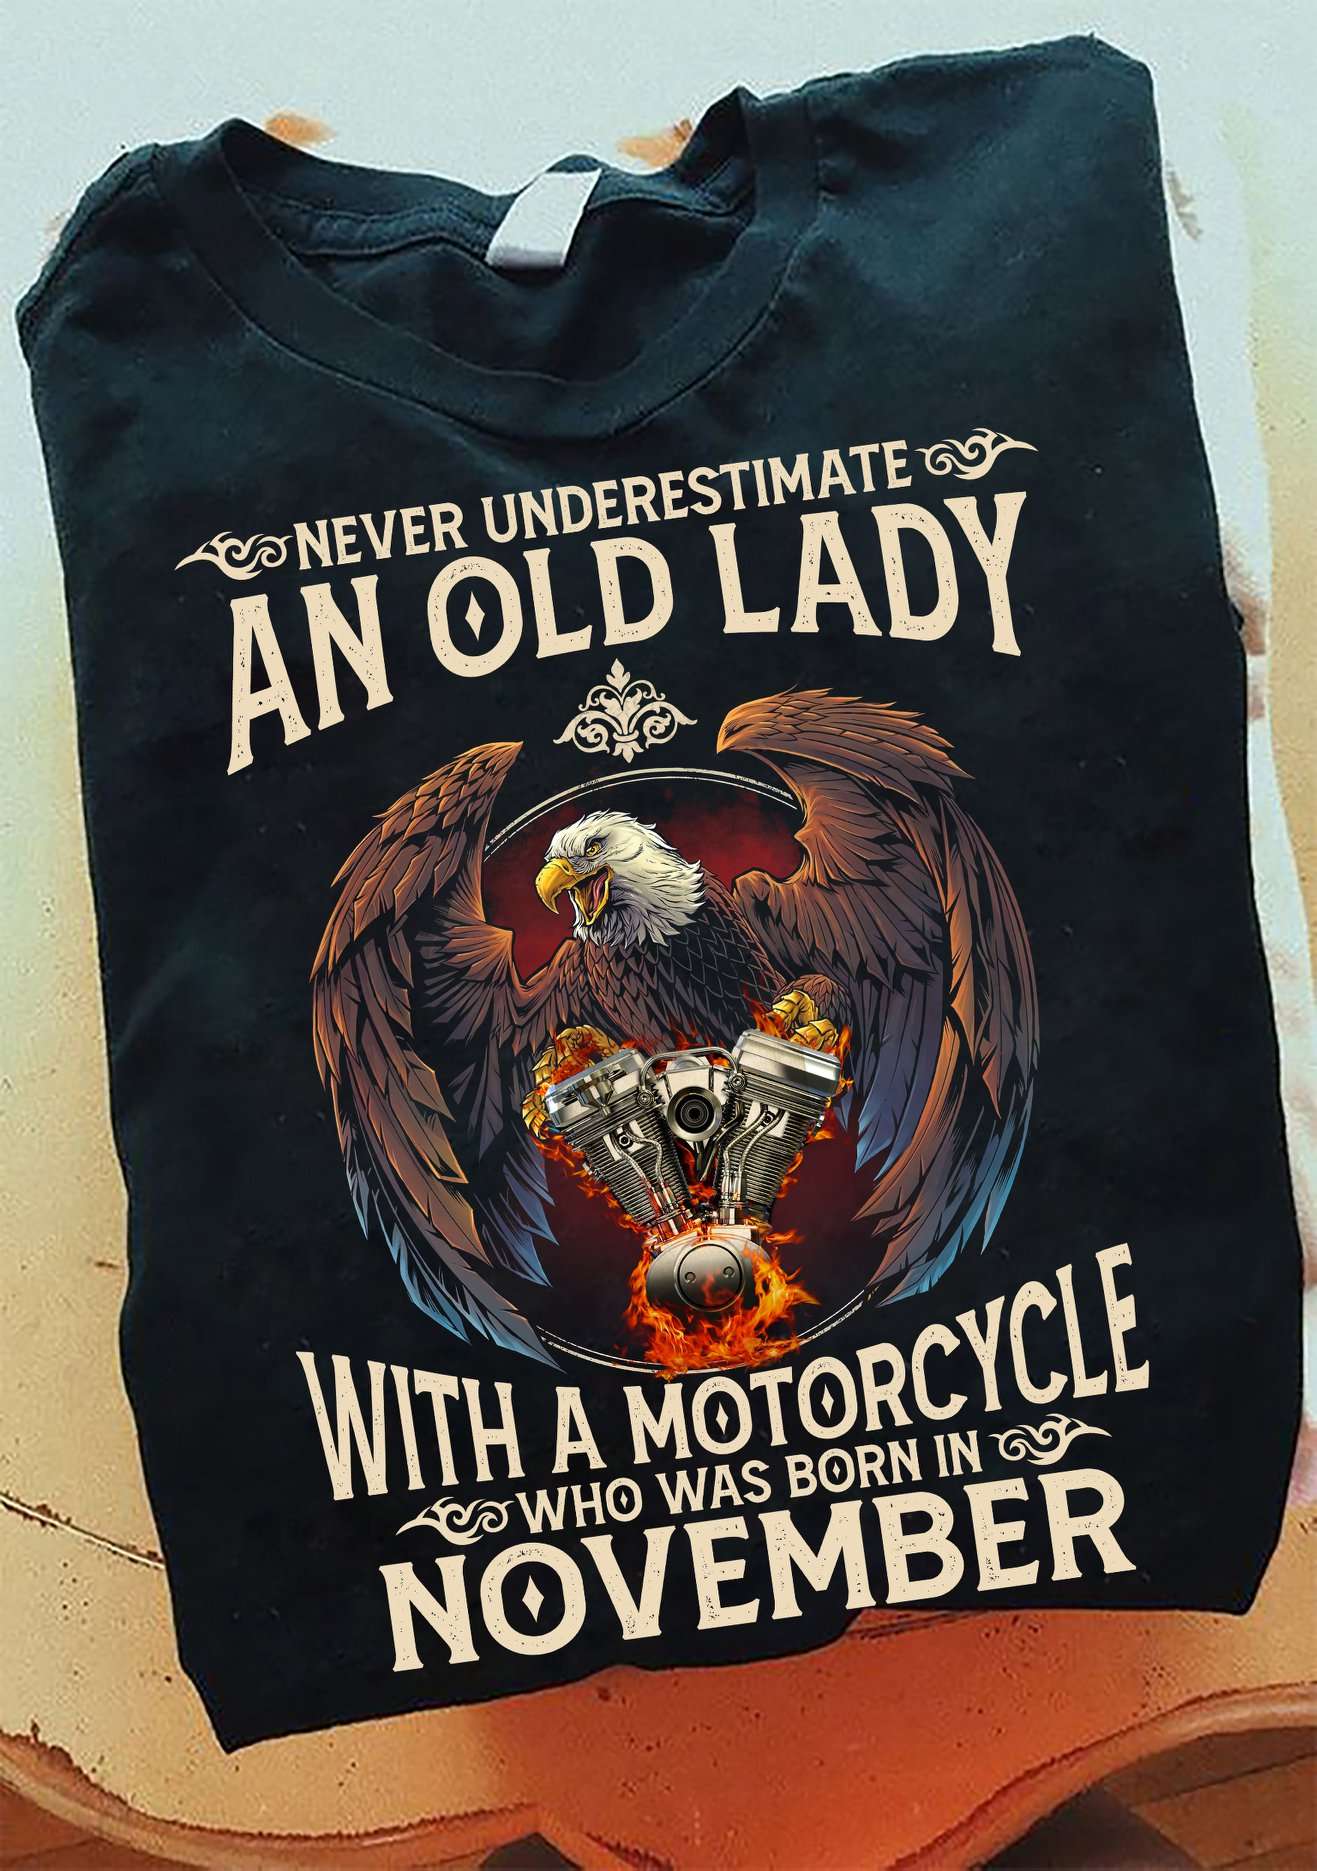 Never underestimate an old lady with a motorcycle who was born in November - Eagle and engine, women biker